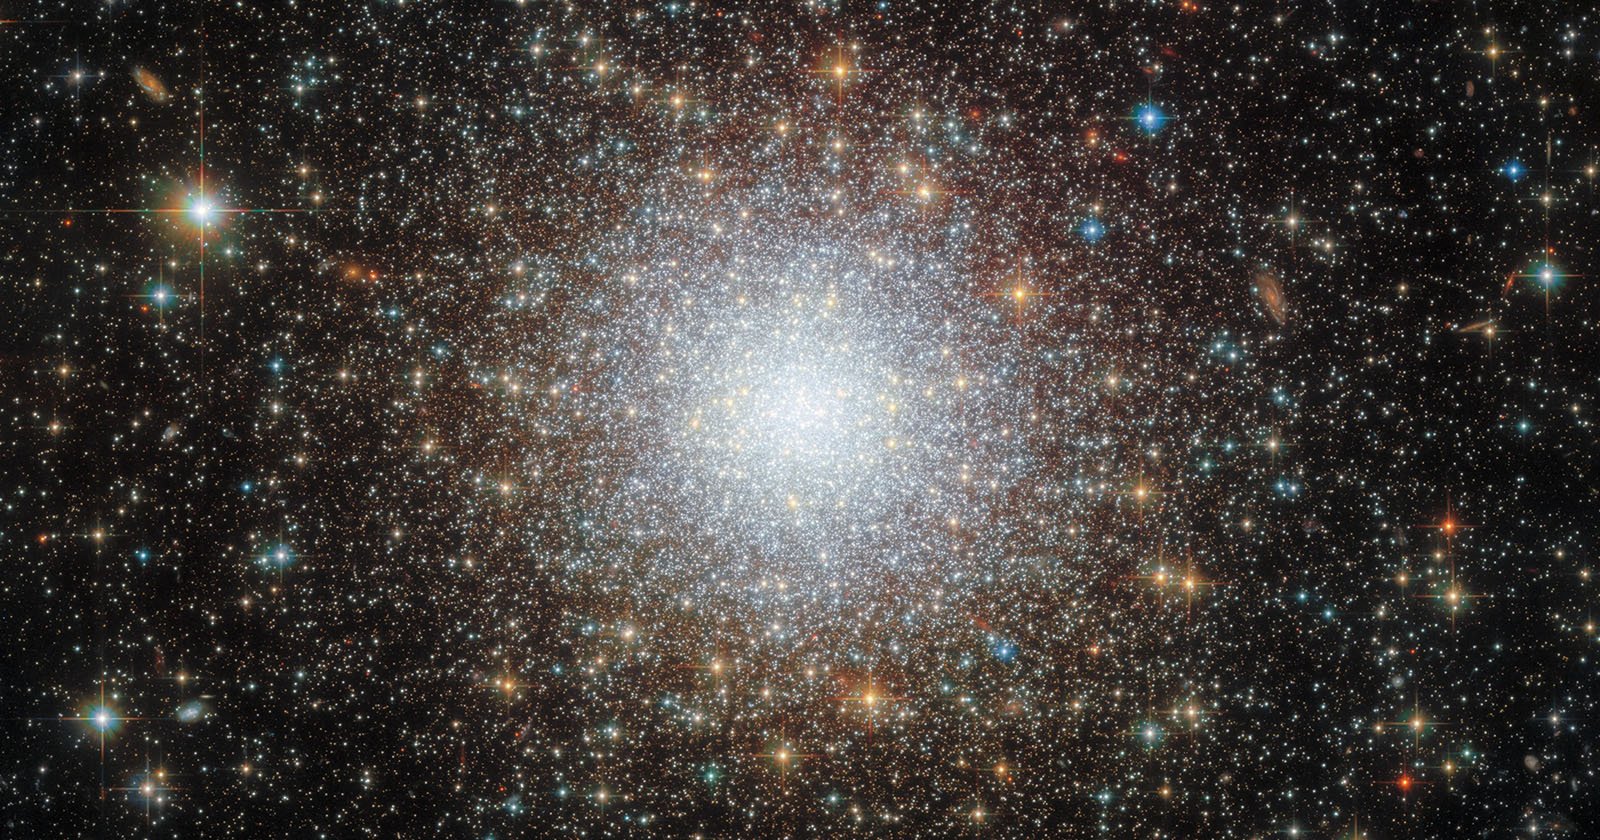  hubble reveals intricate beautiful billion-year-old cluster stars 